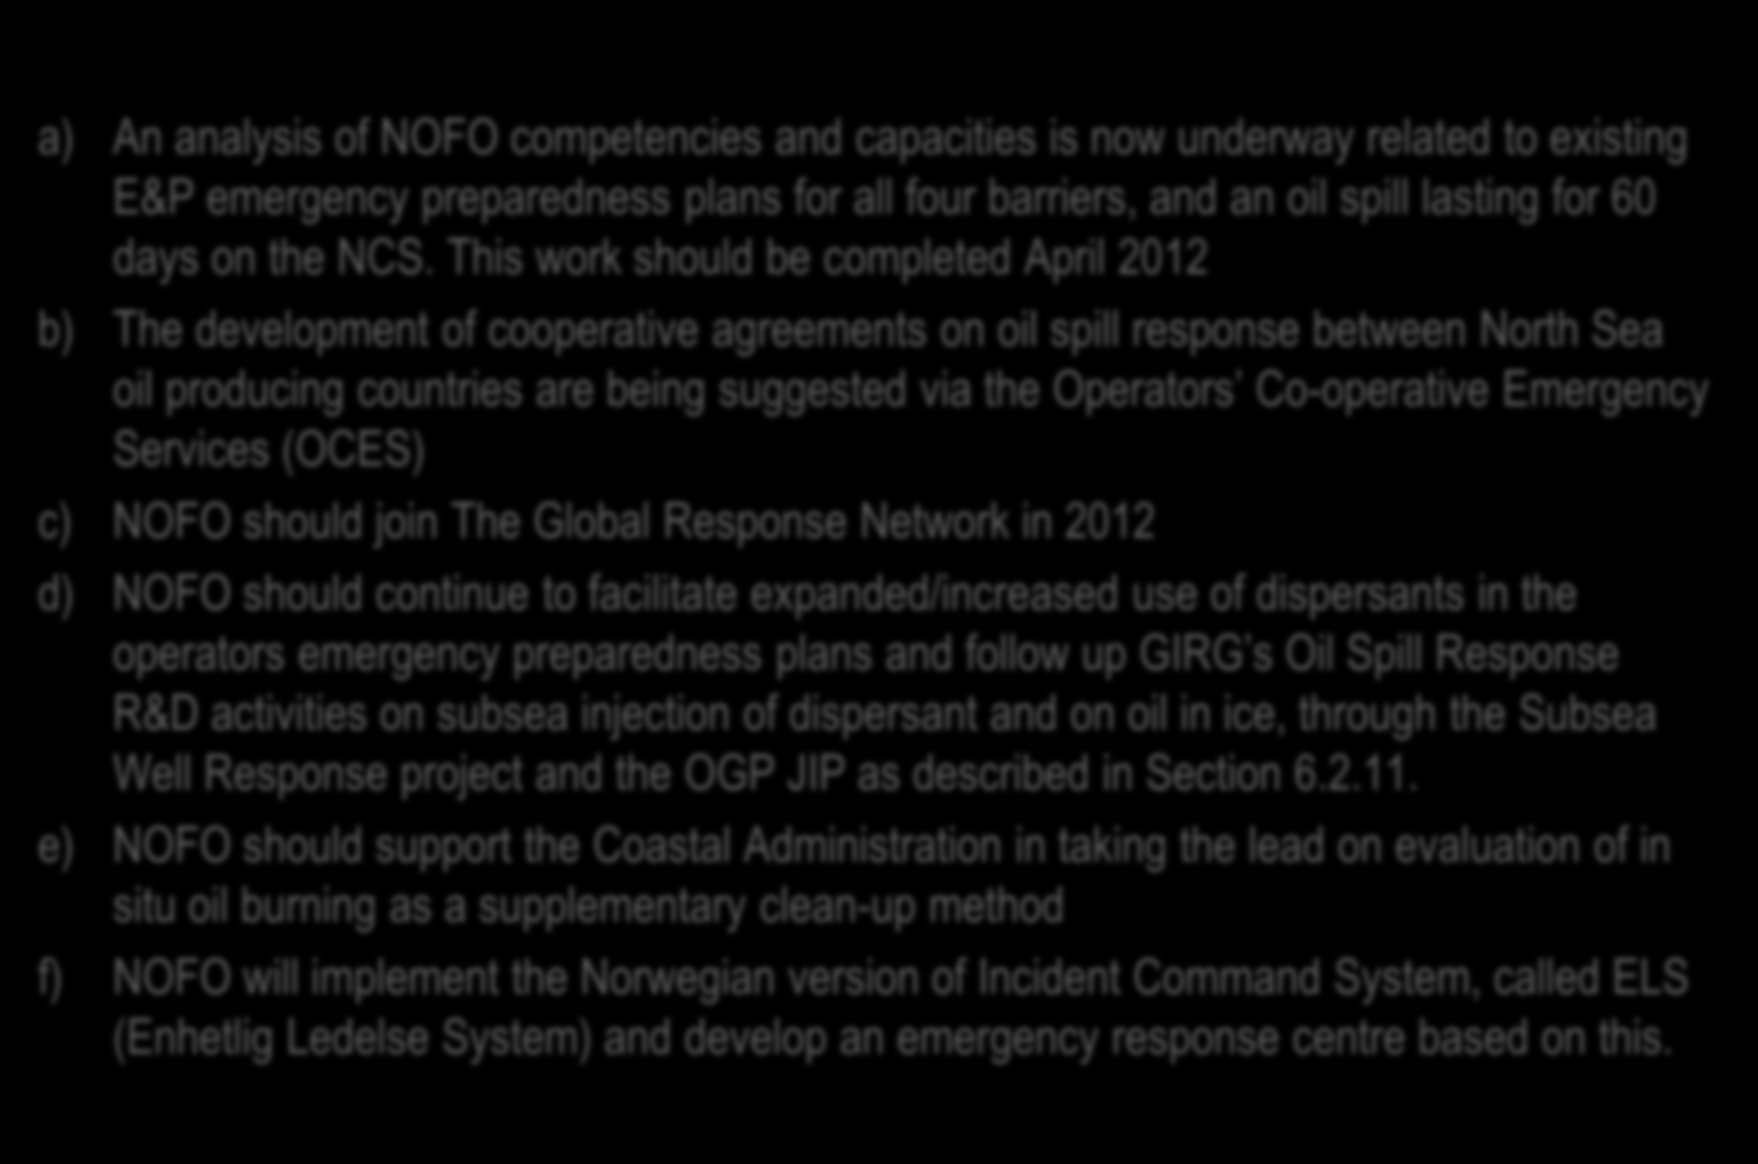 The following summaries current NOFO recommendations for actions a) An analysis of NOFO competencies and capacities is now underway related to existing E&P emergency preparedness plans for all four